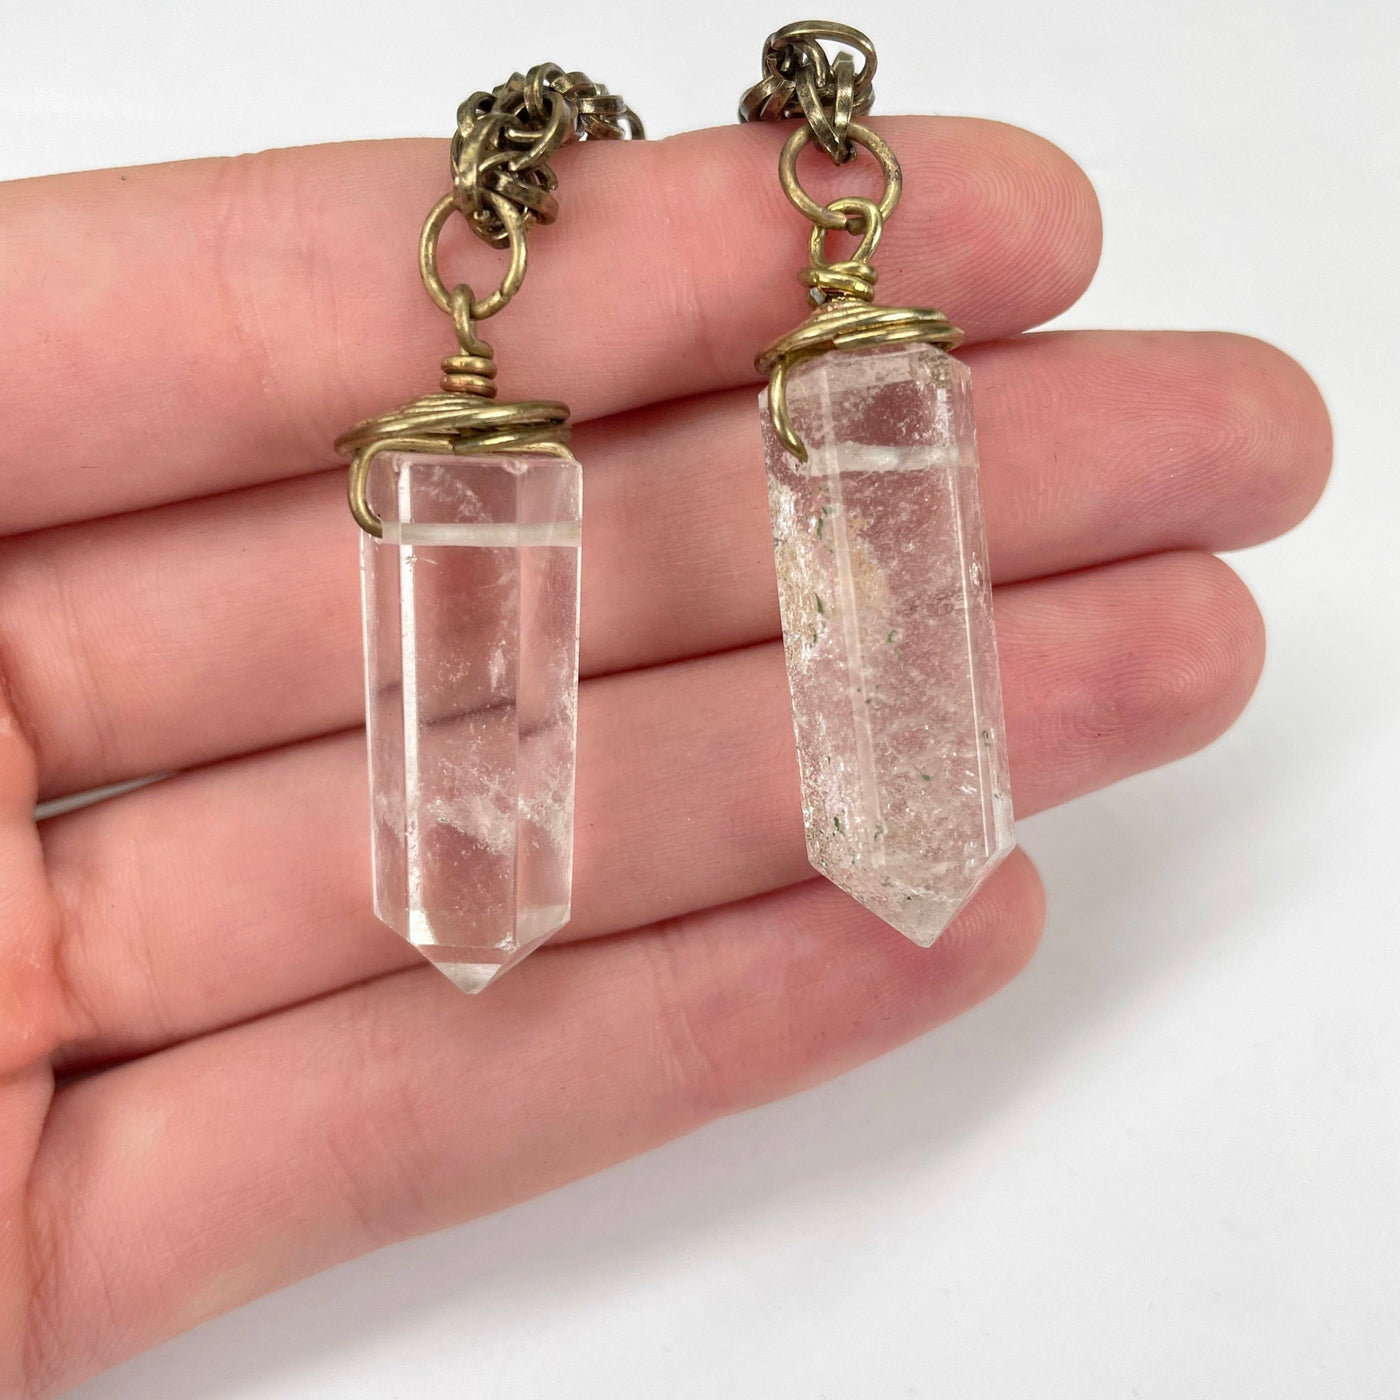 middle crystal quartz pendants in hand for size reference